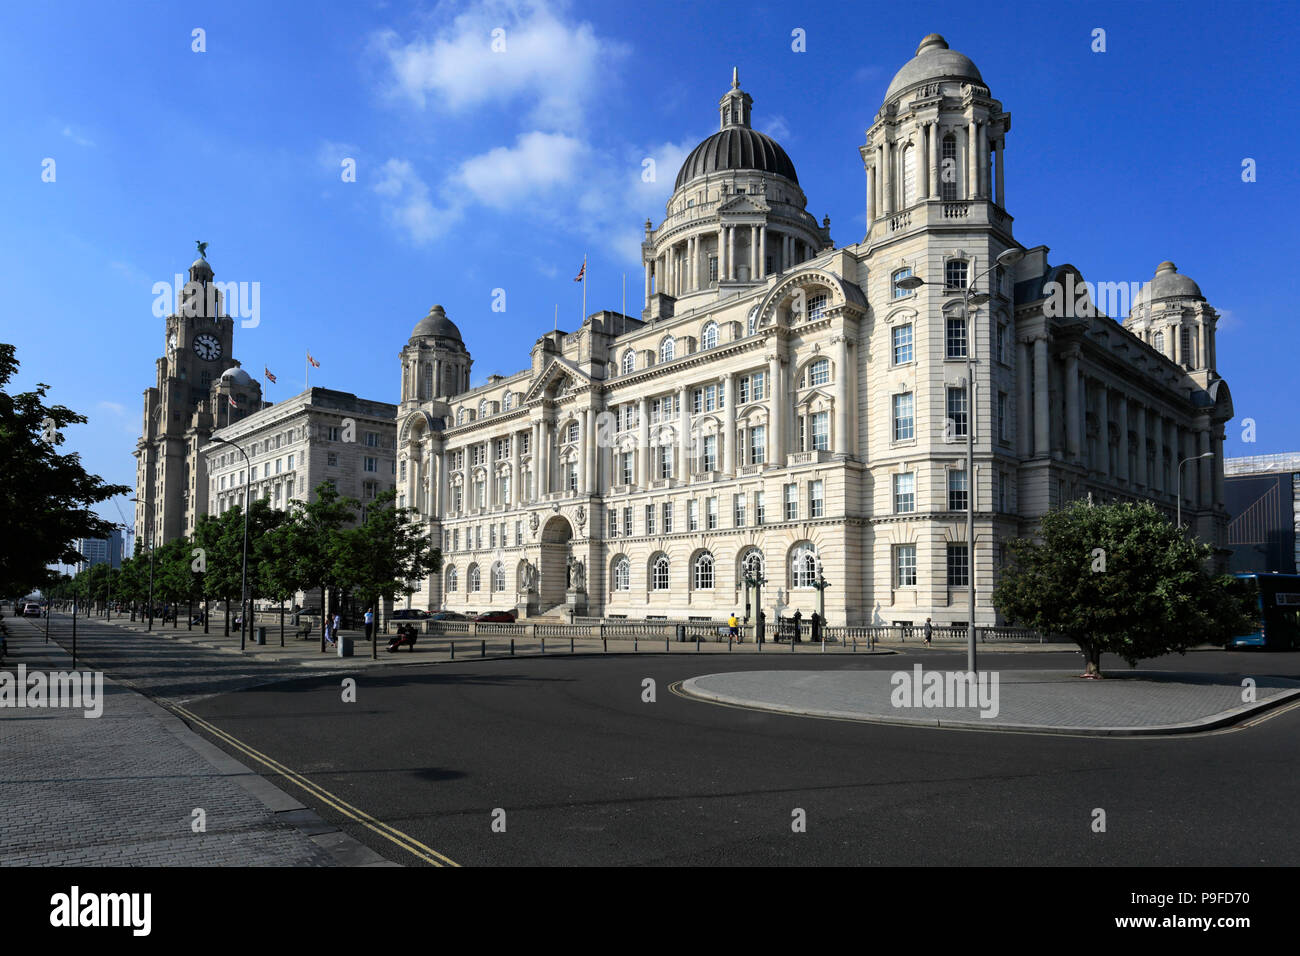 The Port of Liverpool Building, George's Parade, Pier Head, UNESCO World Heritage Site, Liverpool, Merseyside, England, UK Stock Photo